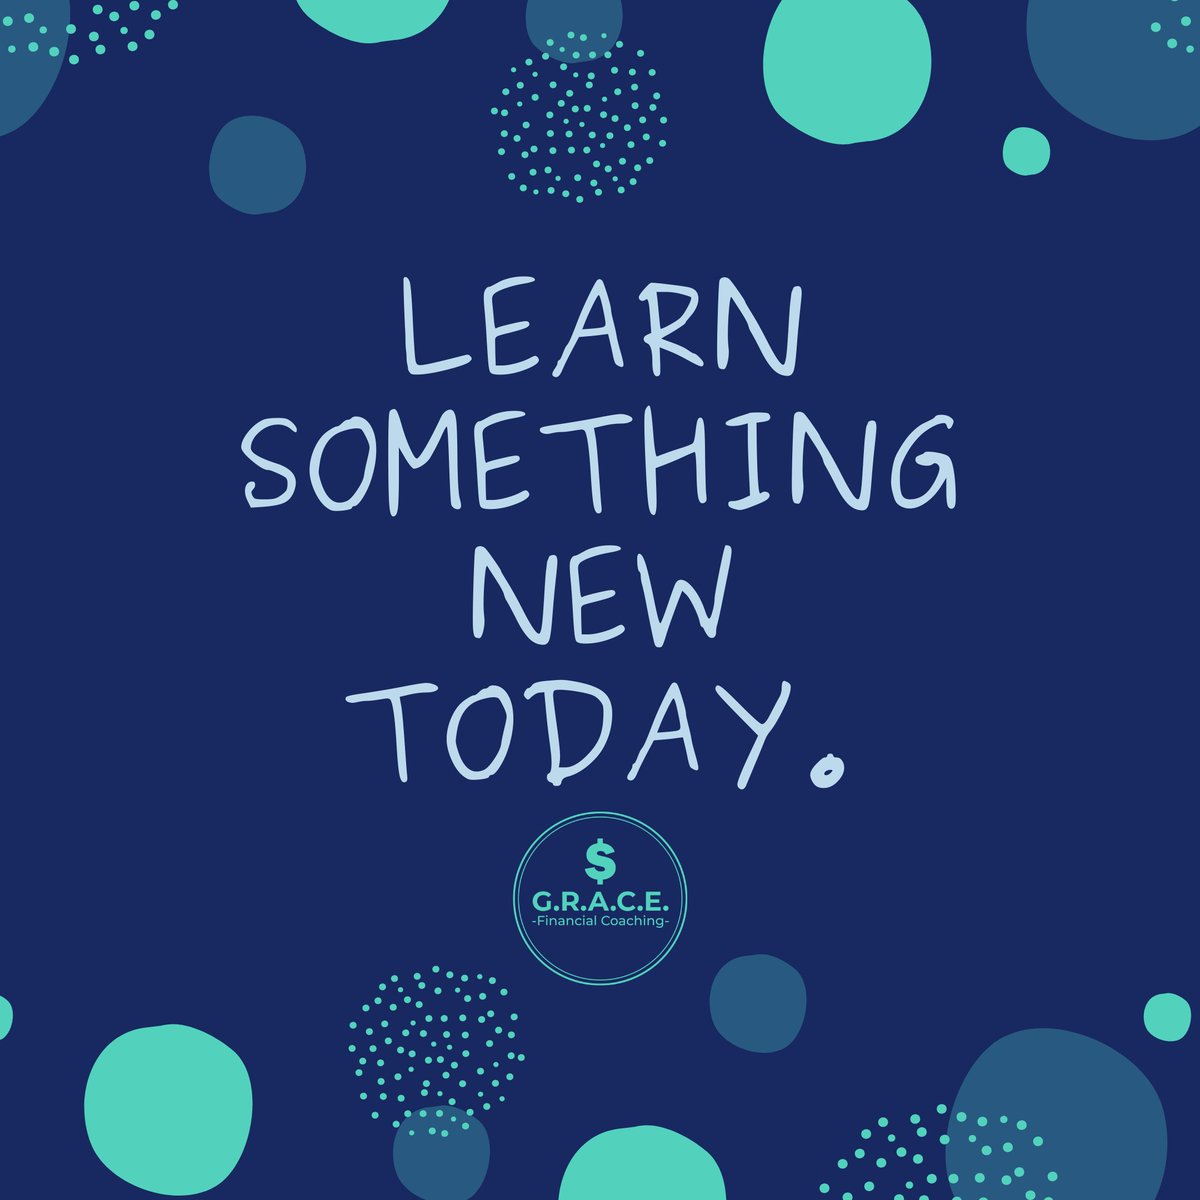 What do you like learning about?  I'm a big history person.

This morning, while scrolling on my X feed, I learned about a whole bunch of things that happened on May 2...I'll put them in the comments!  

#learnsomethingnew #learnsomethingeveryday